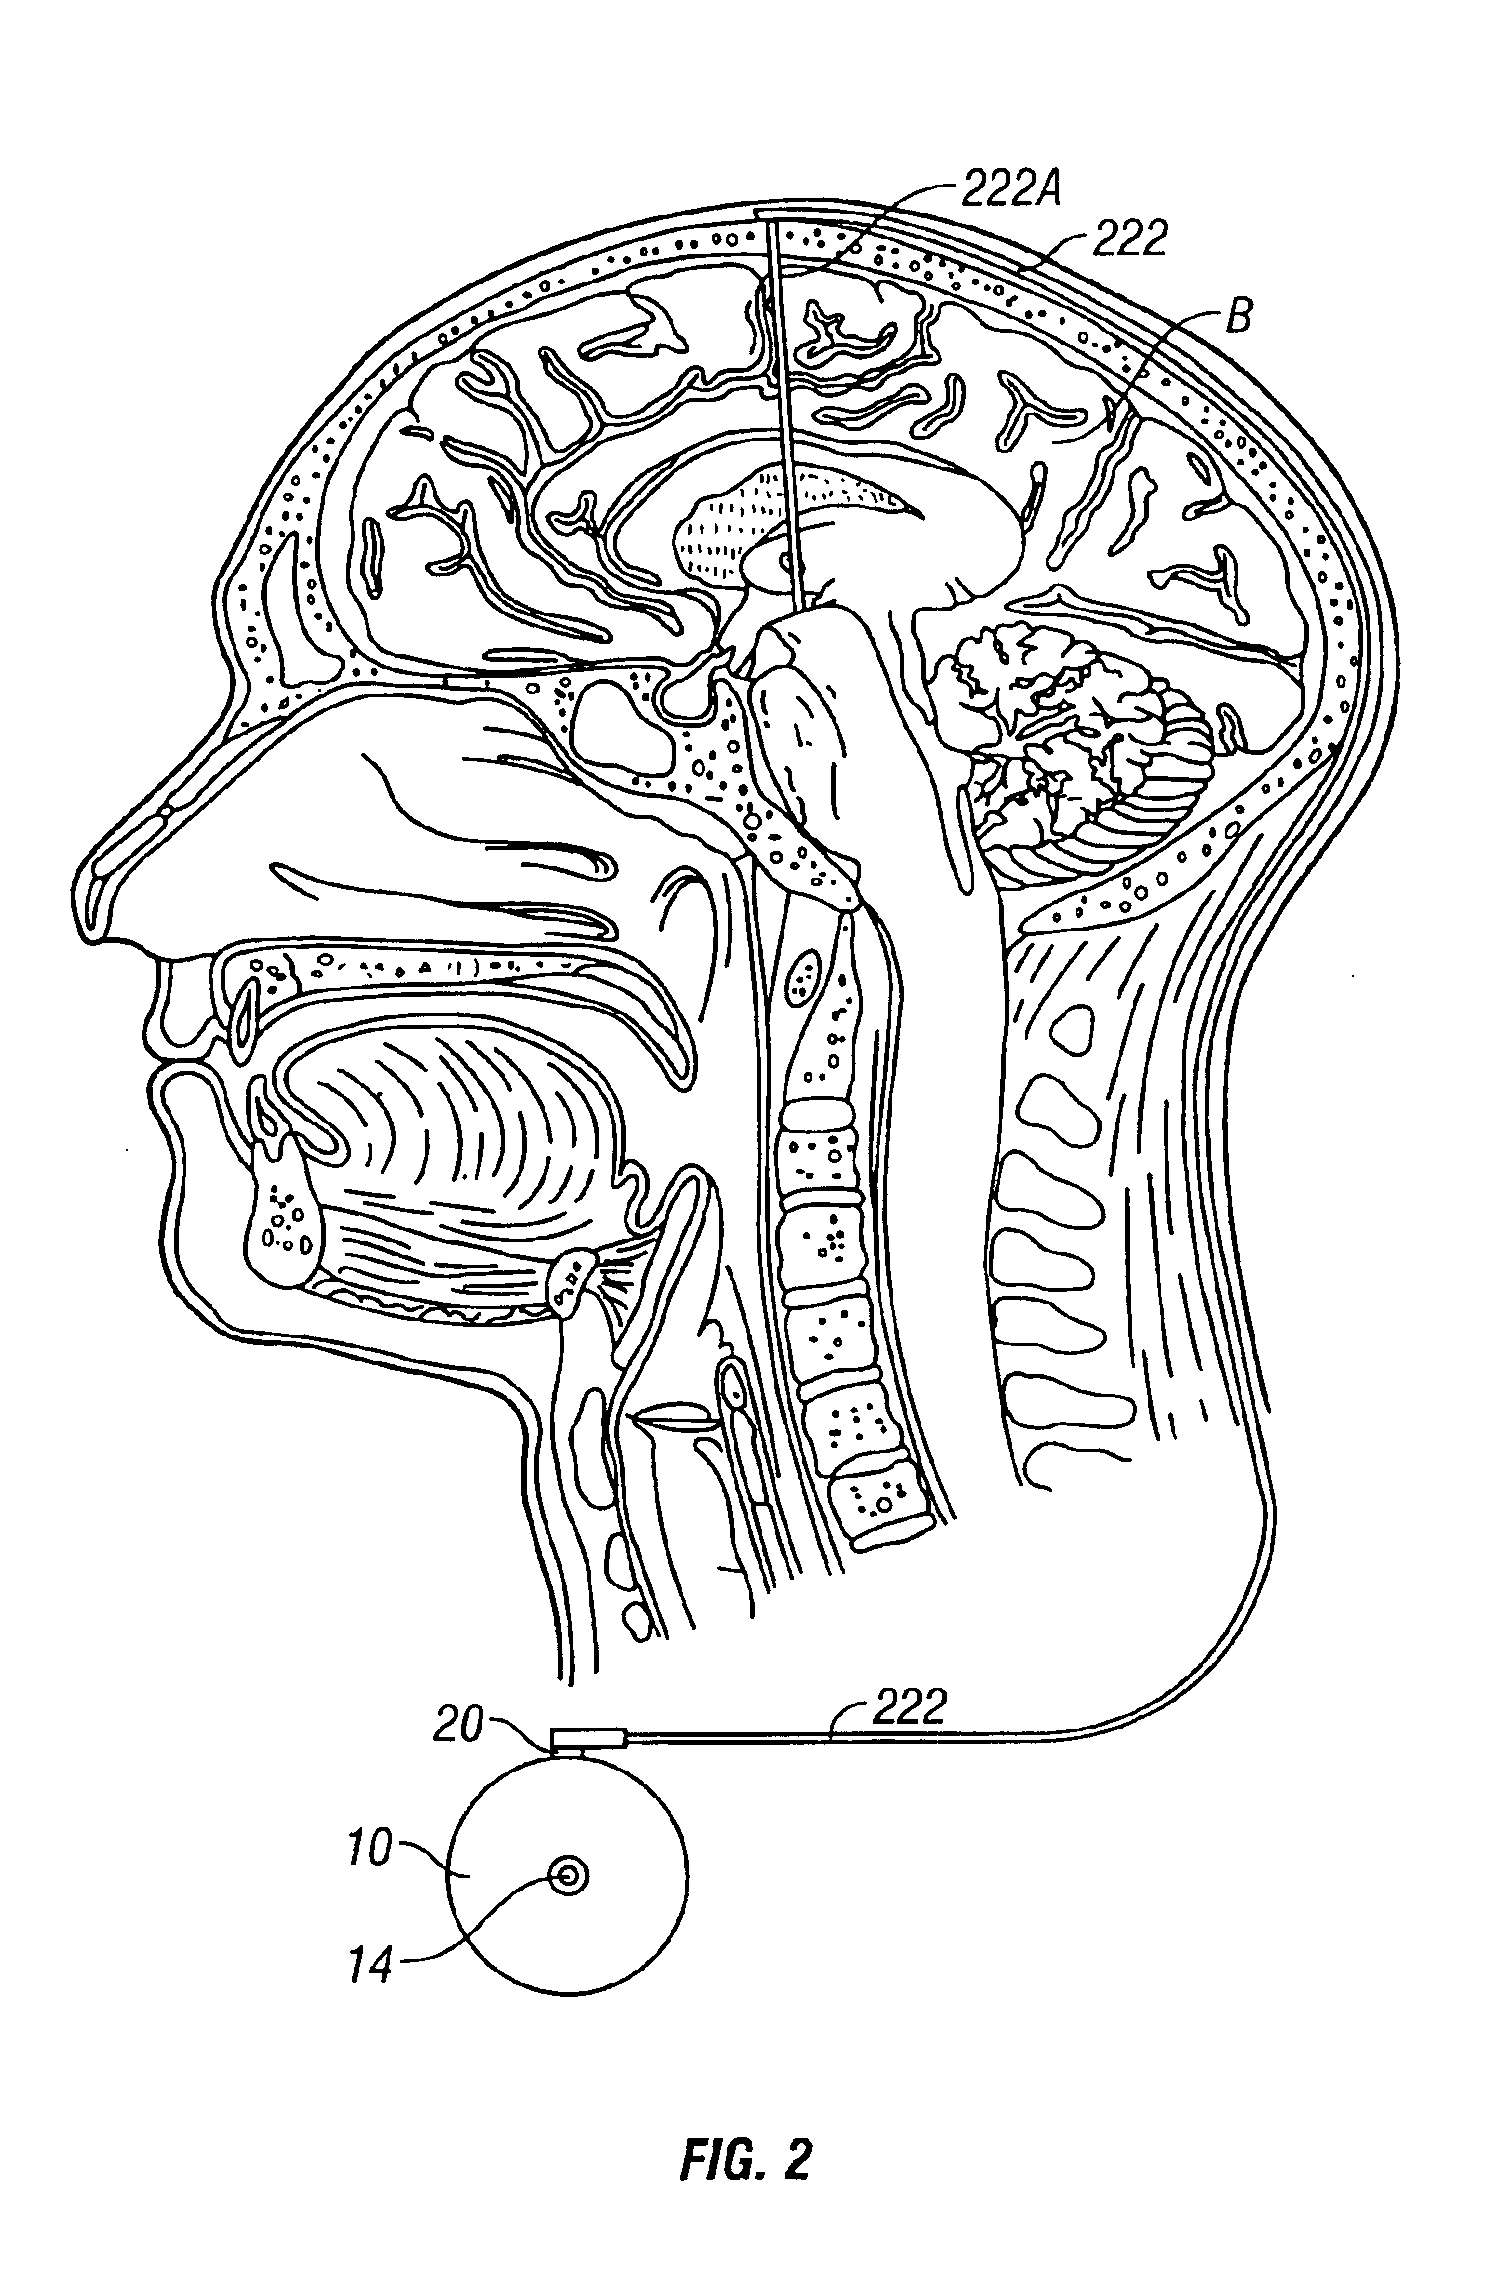 System and method of treating stuttering by neuromodulation